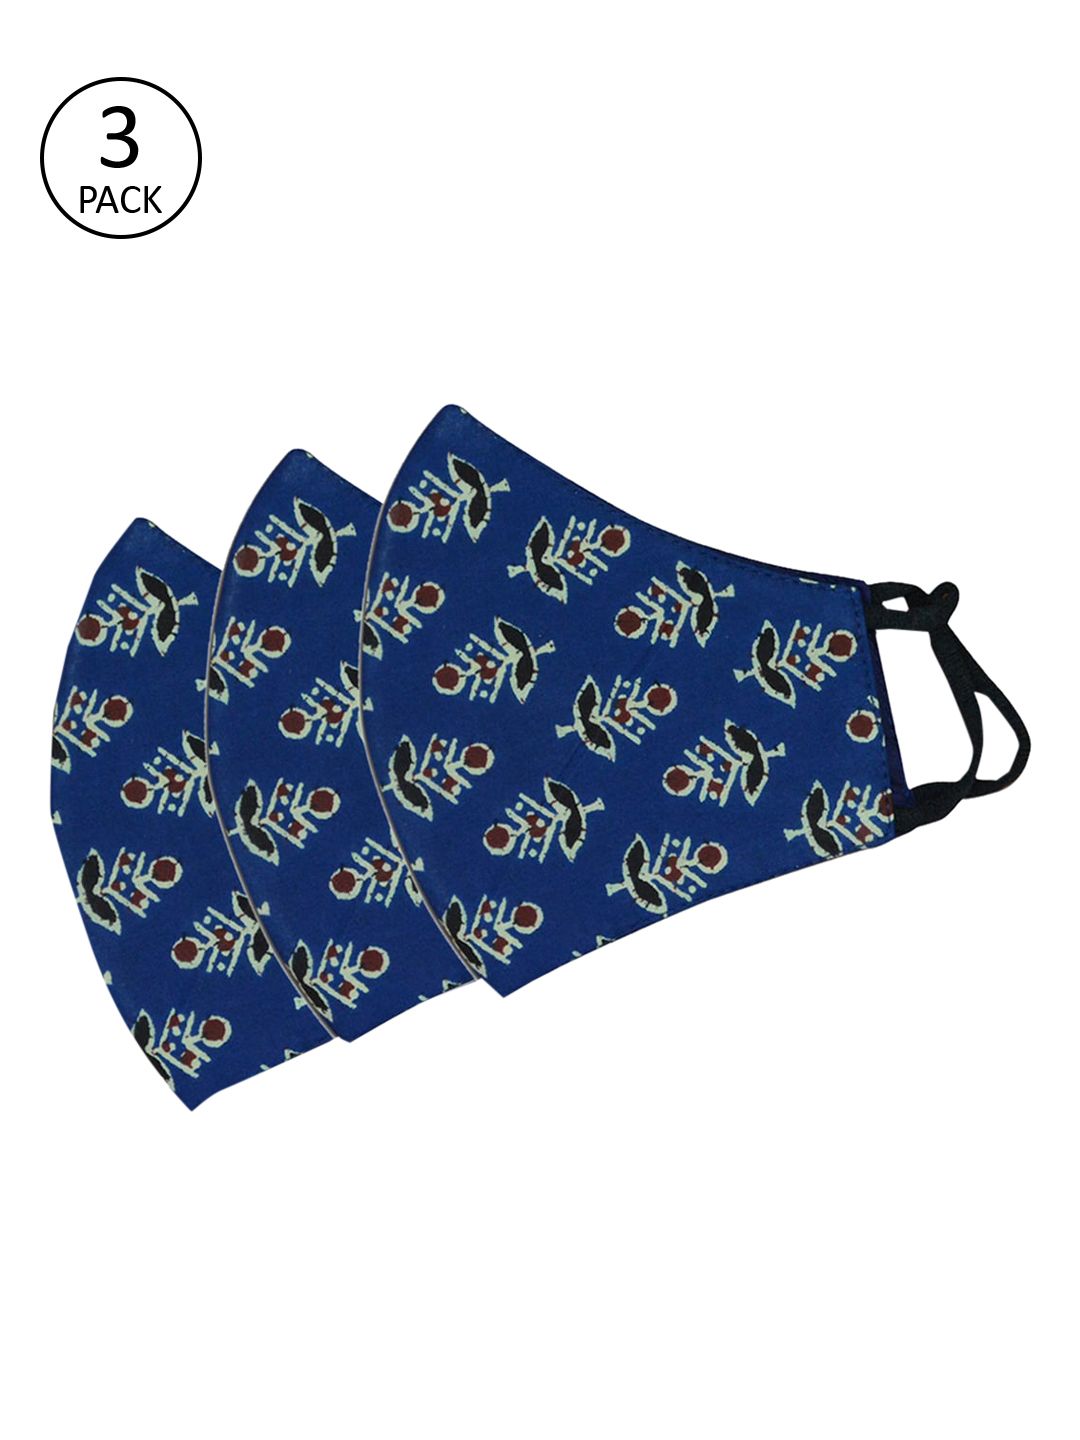 Tossido Pack Of 3 Navy Blue & Black Printed 3-Ply 100% Cotton Reusable Cloth Masks Price in India